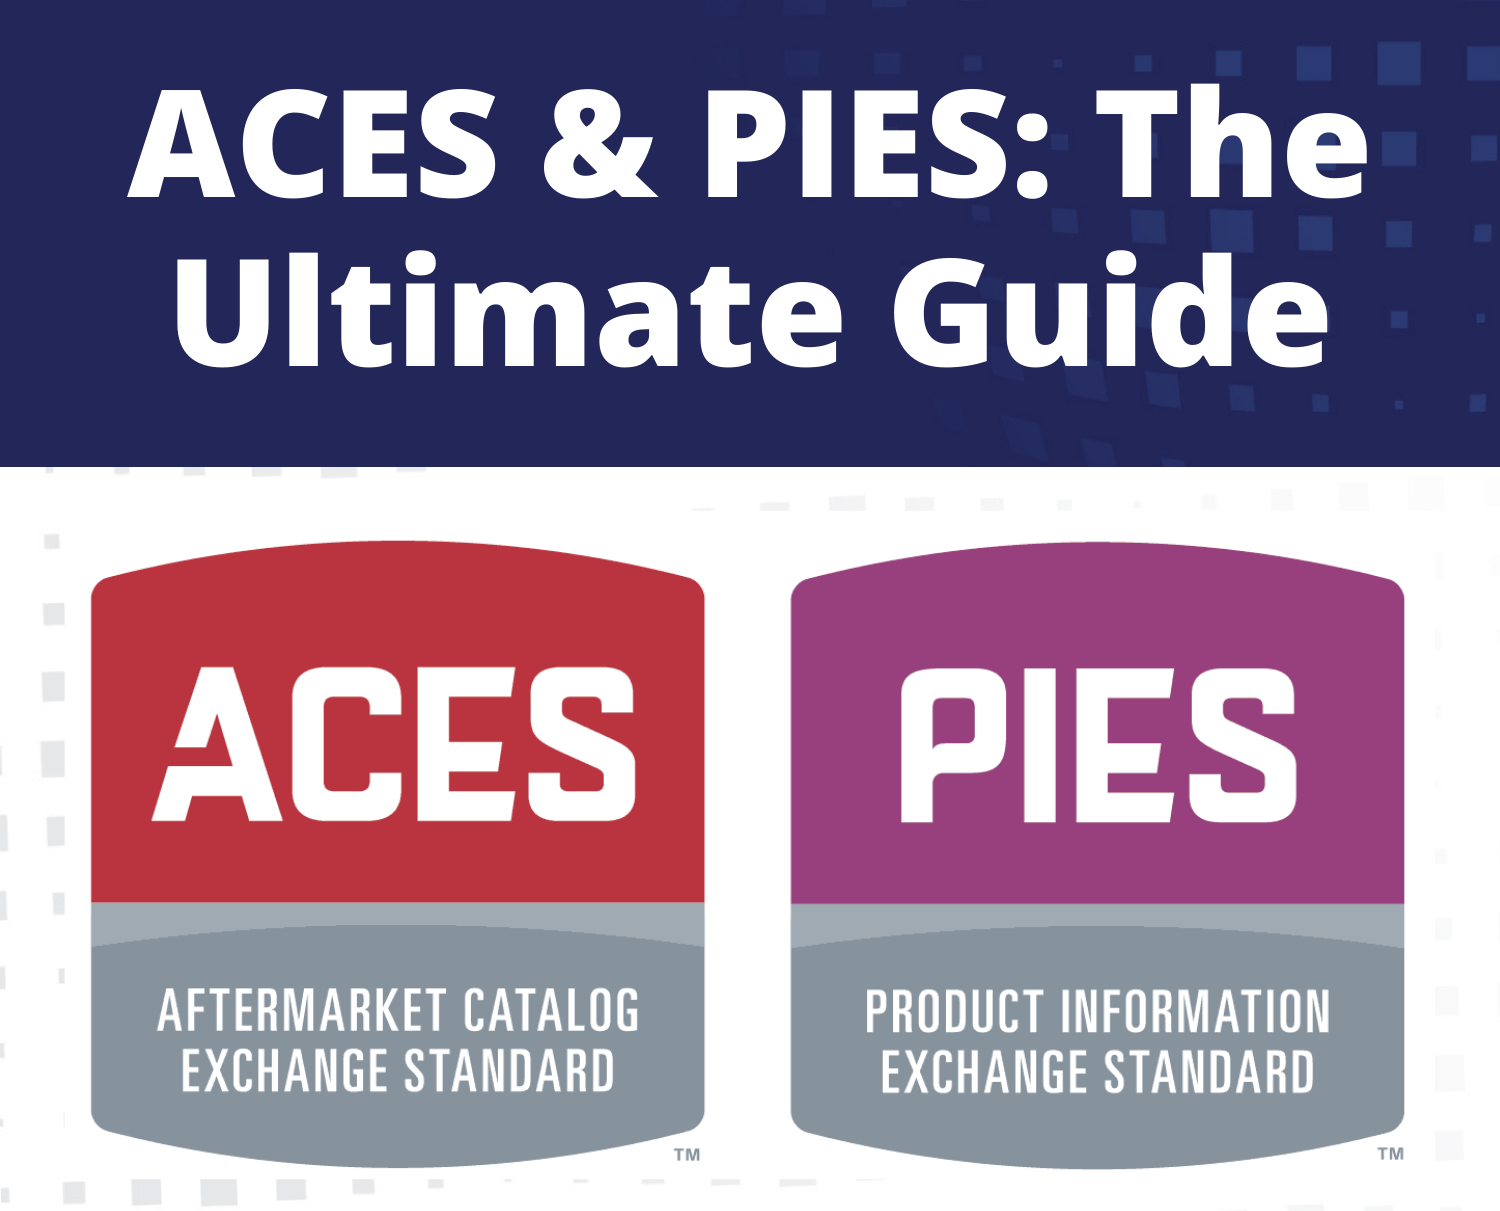 ACES and PIES in 2021: The Ultimate Guide - PDM Automotive